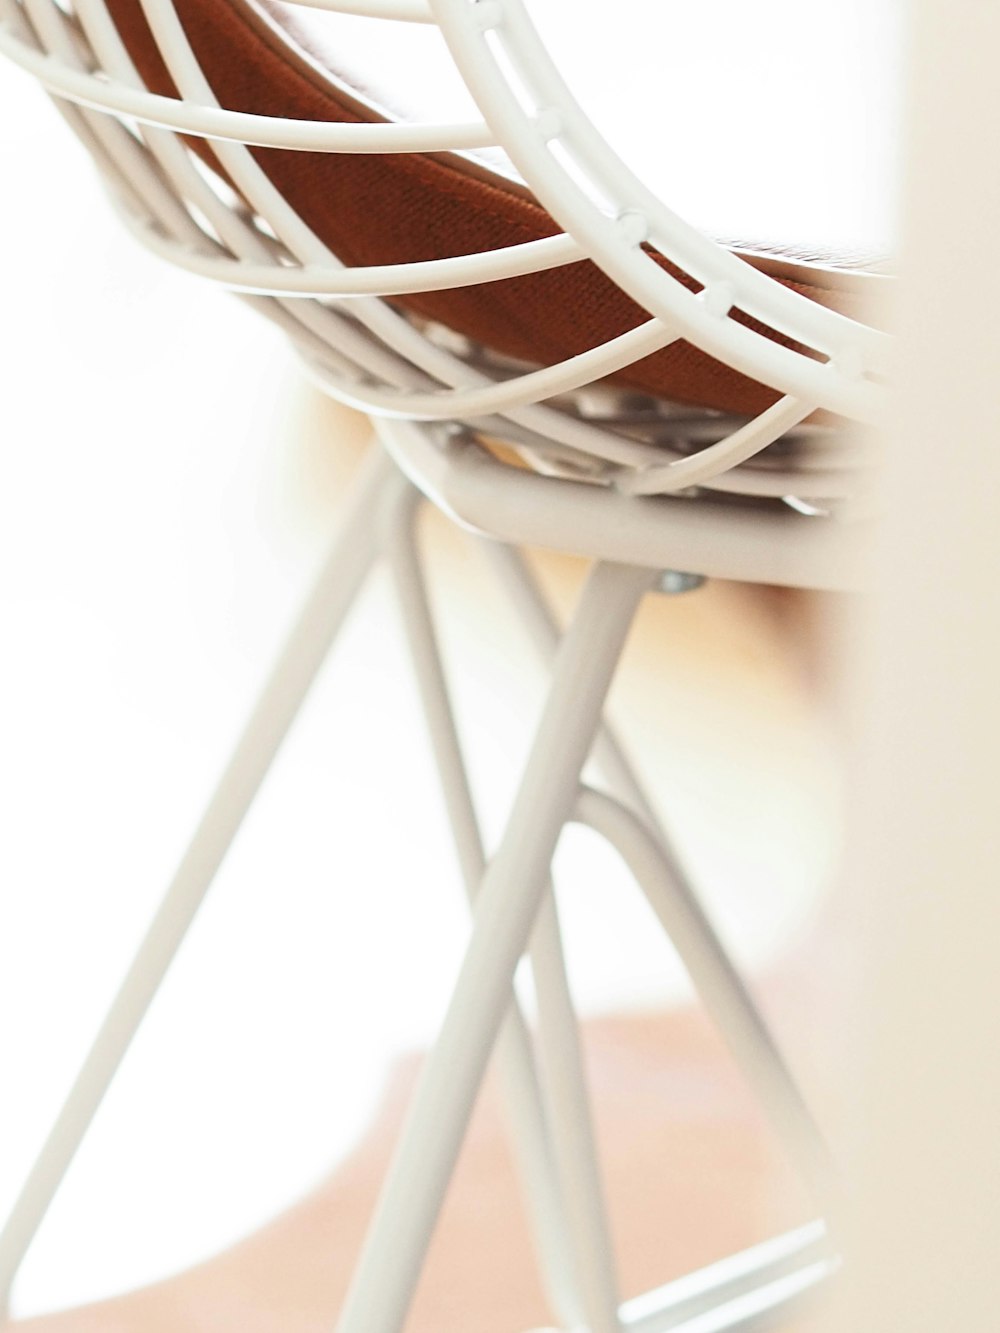 a close up of a white chair with a wooden seat